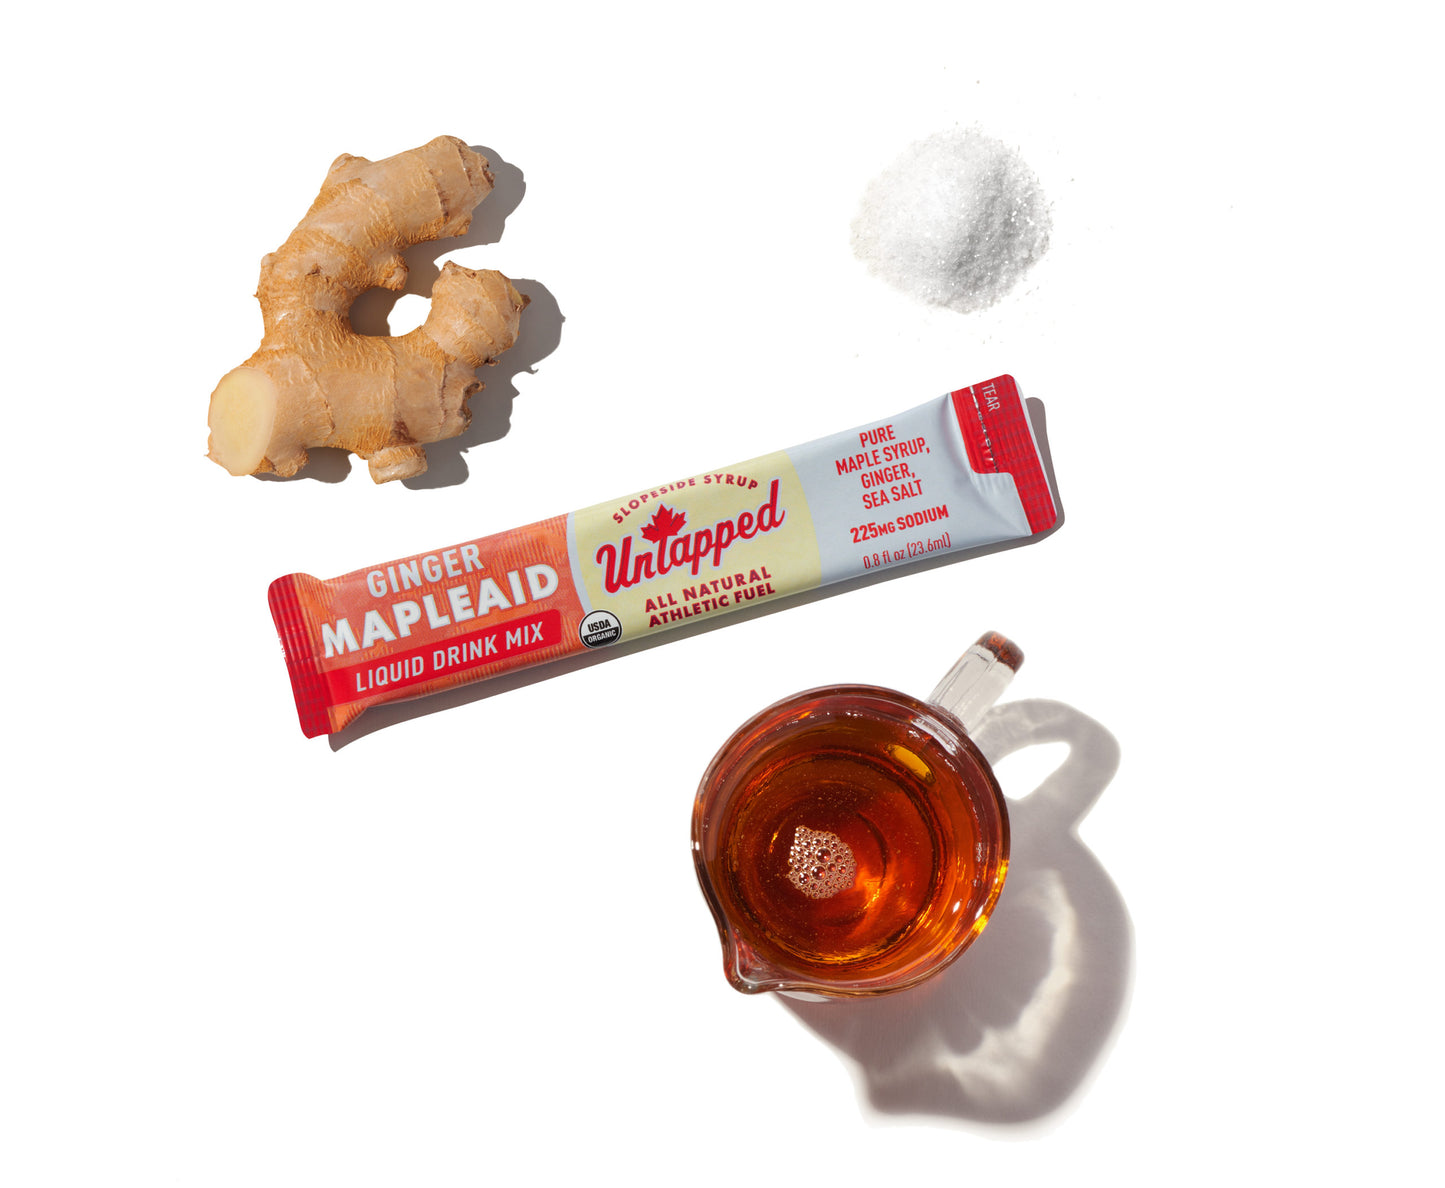 UnTapped - Mapleaid Drink Mix - Single Serve - Ginger